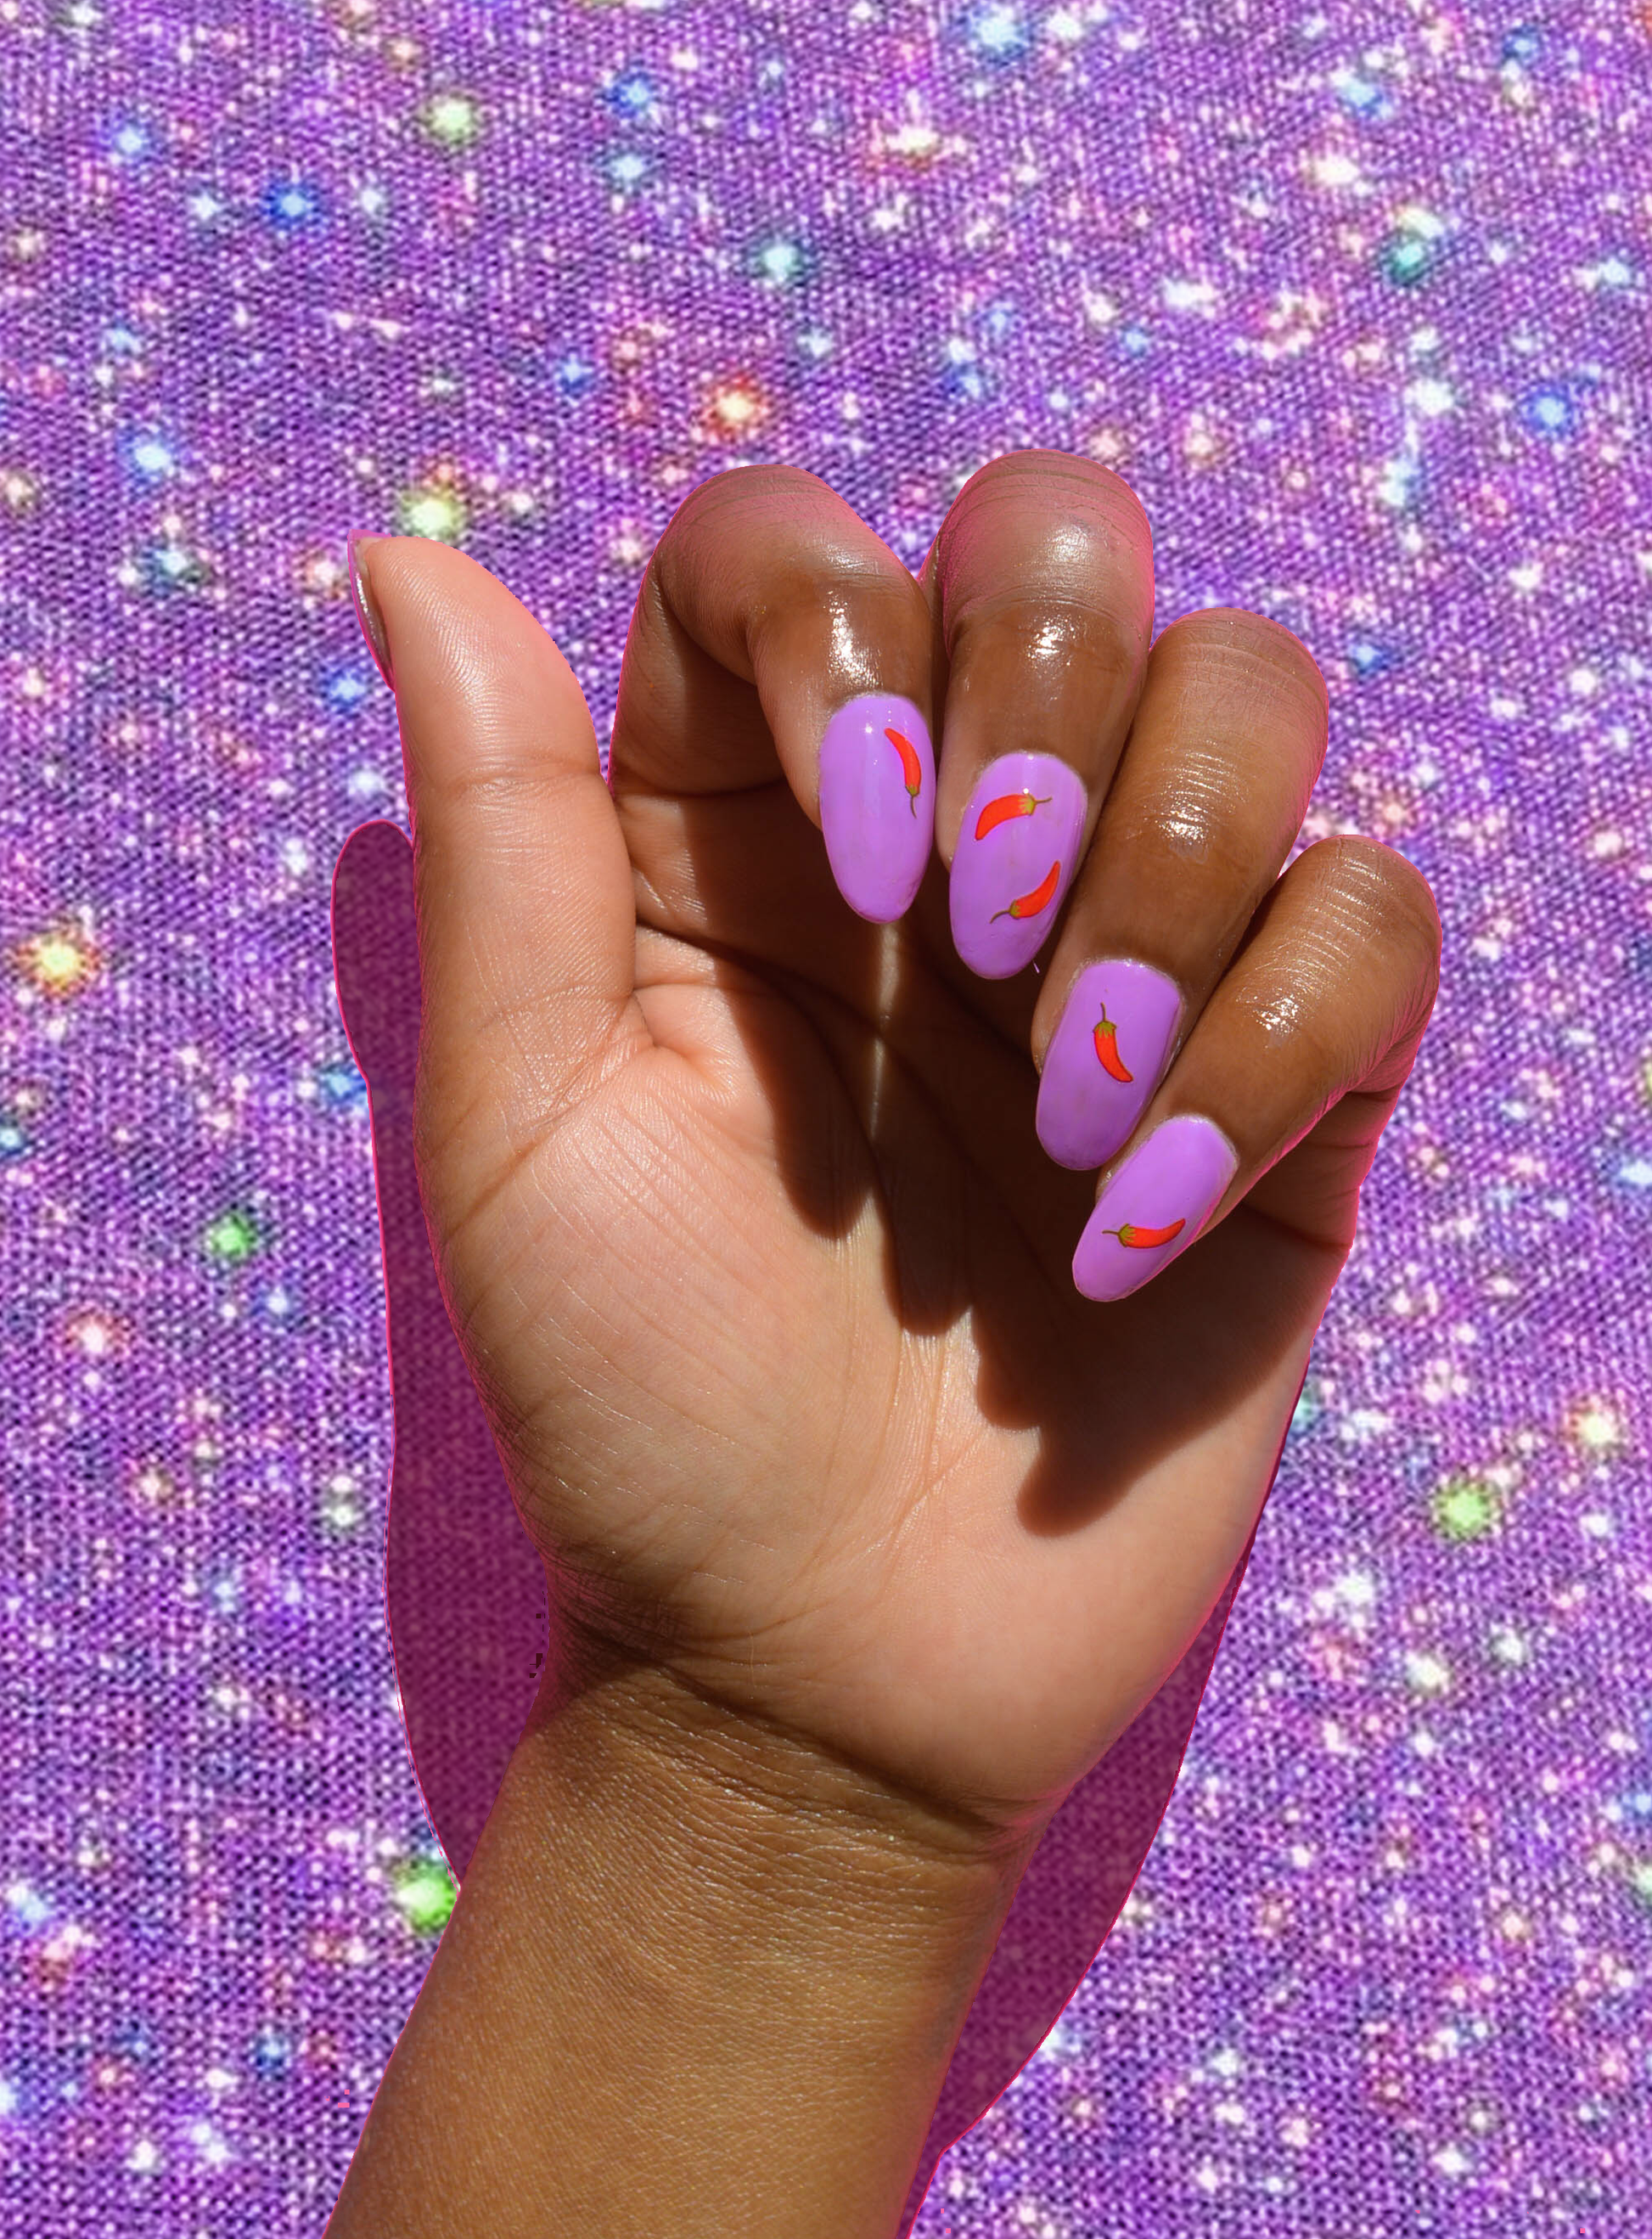 purple nails with chili stickers